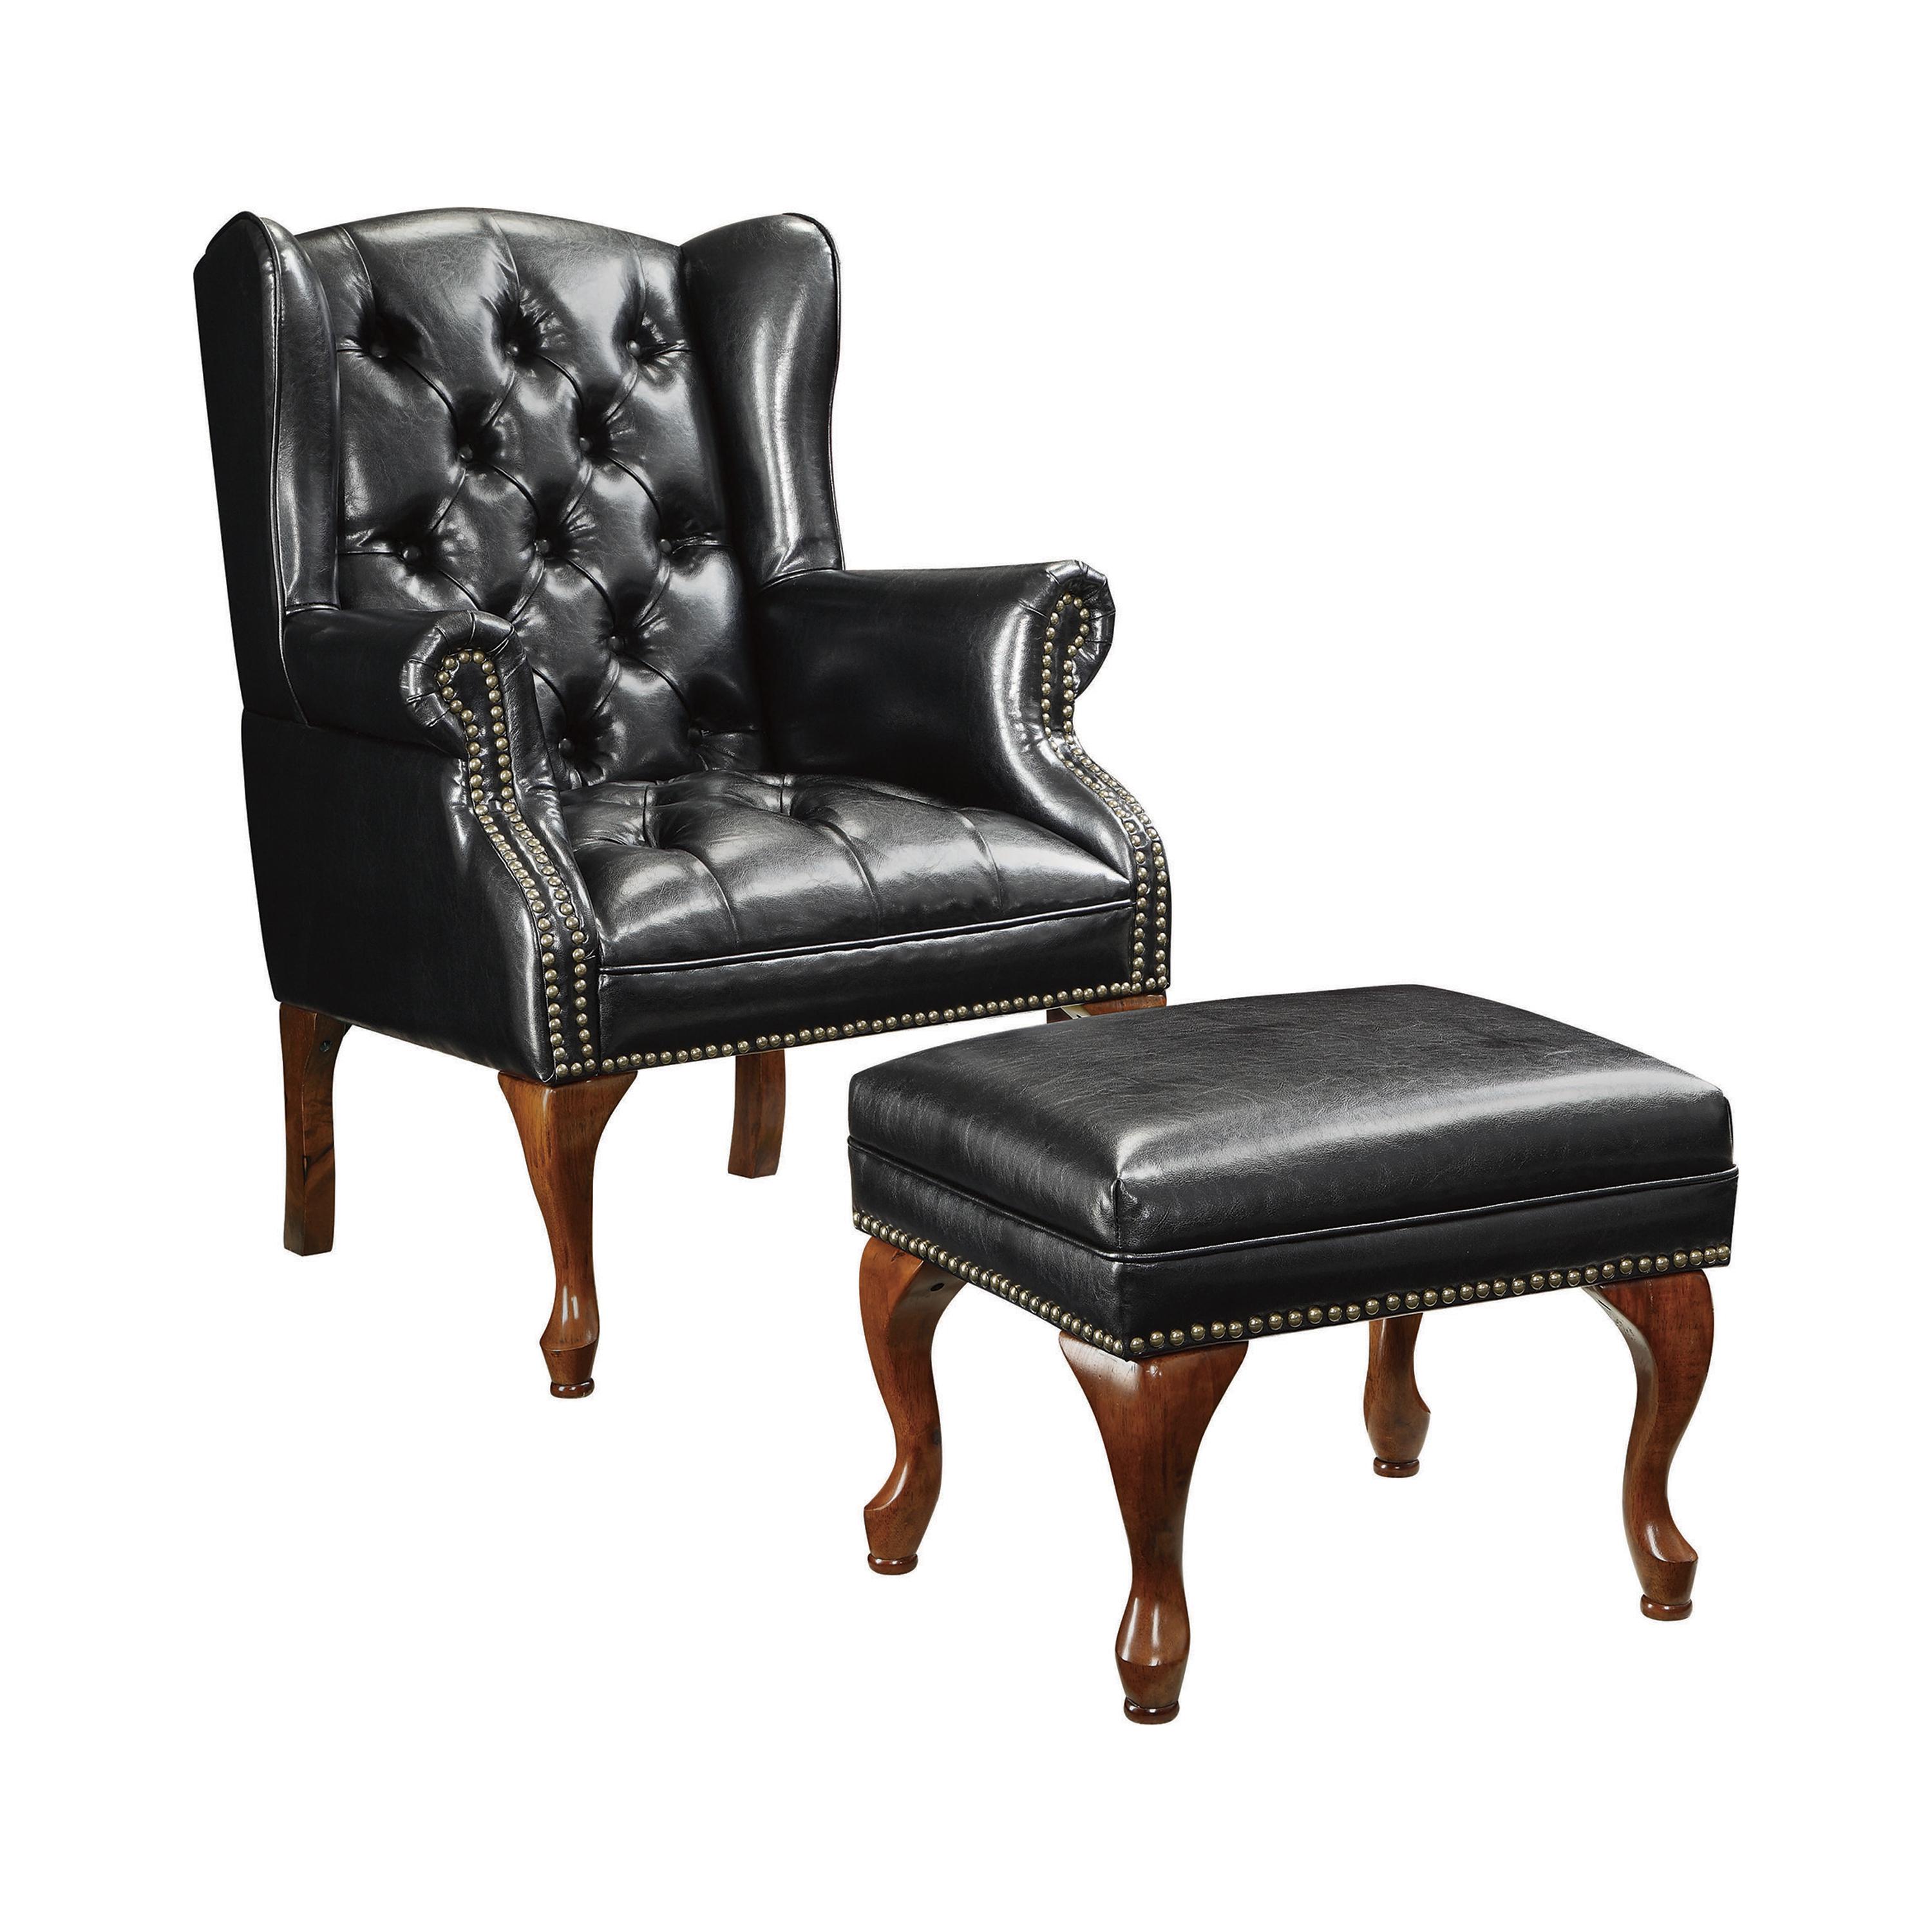 Modern Accent Chair and Ottoman 900262 900262 in Black Leatherette